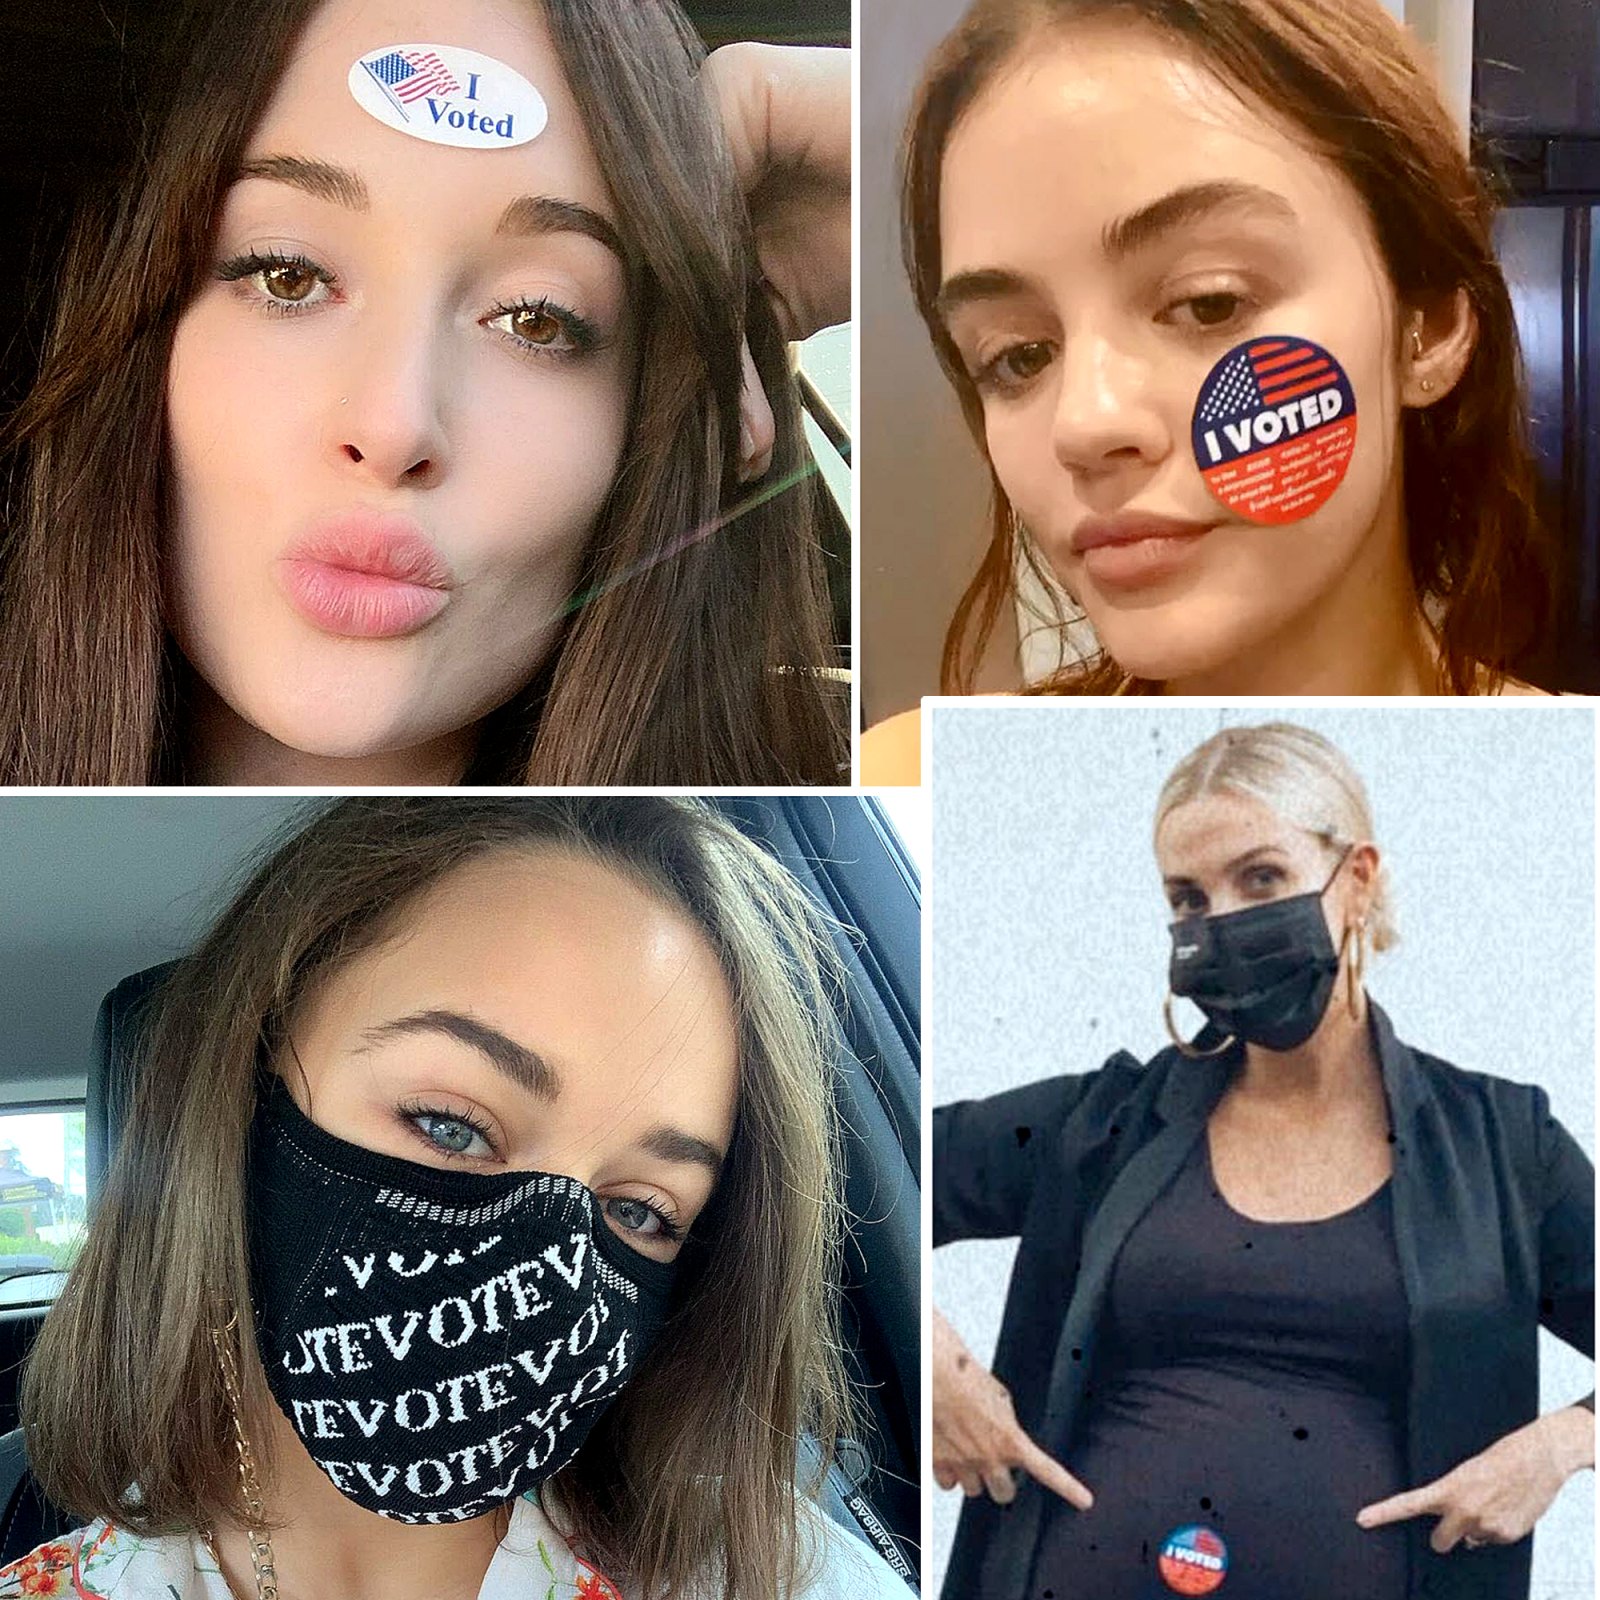 Stars Vote in 2020 Election See the Photos